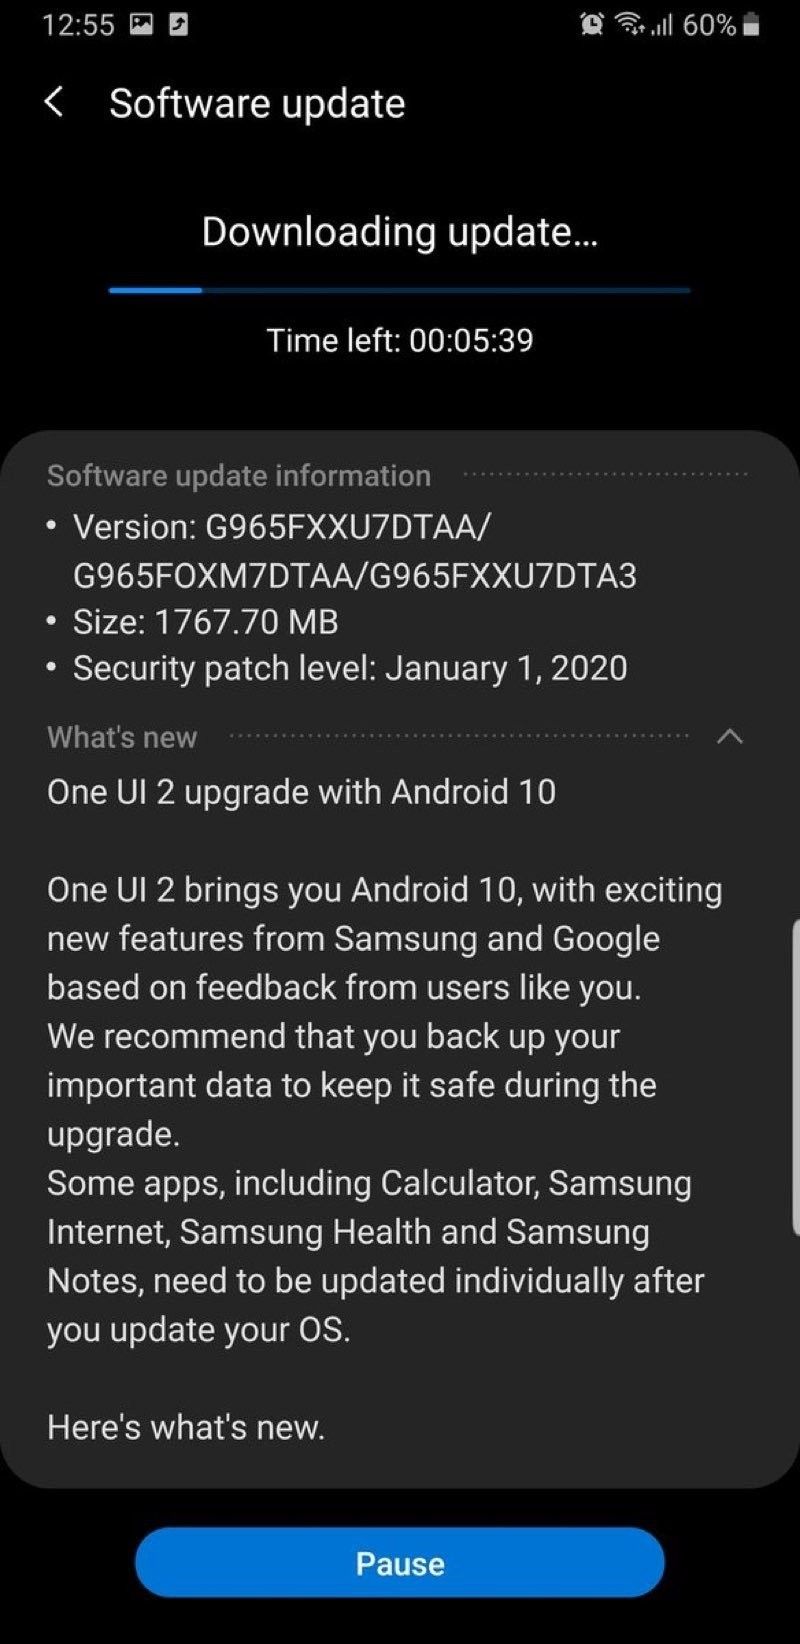 galaxy-s9-android-10-update-2.jpg